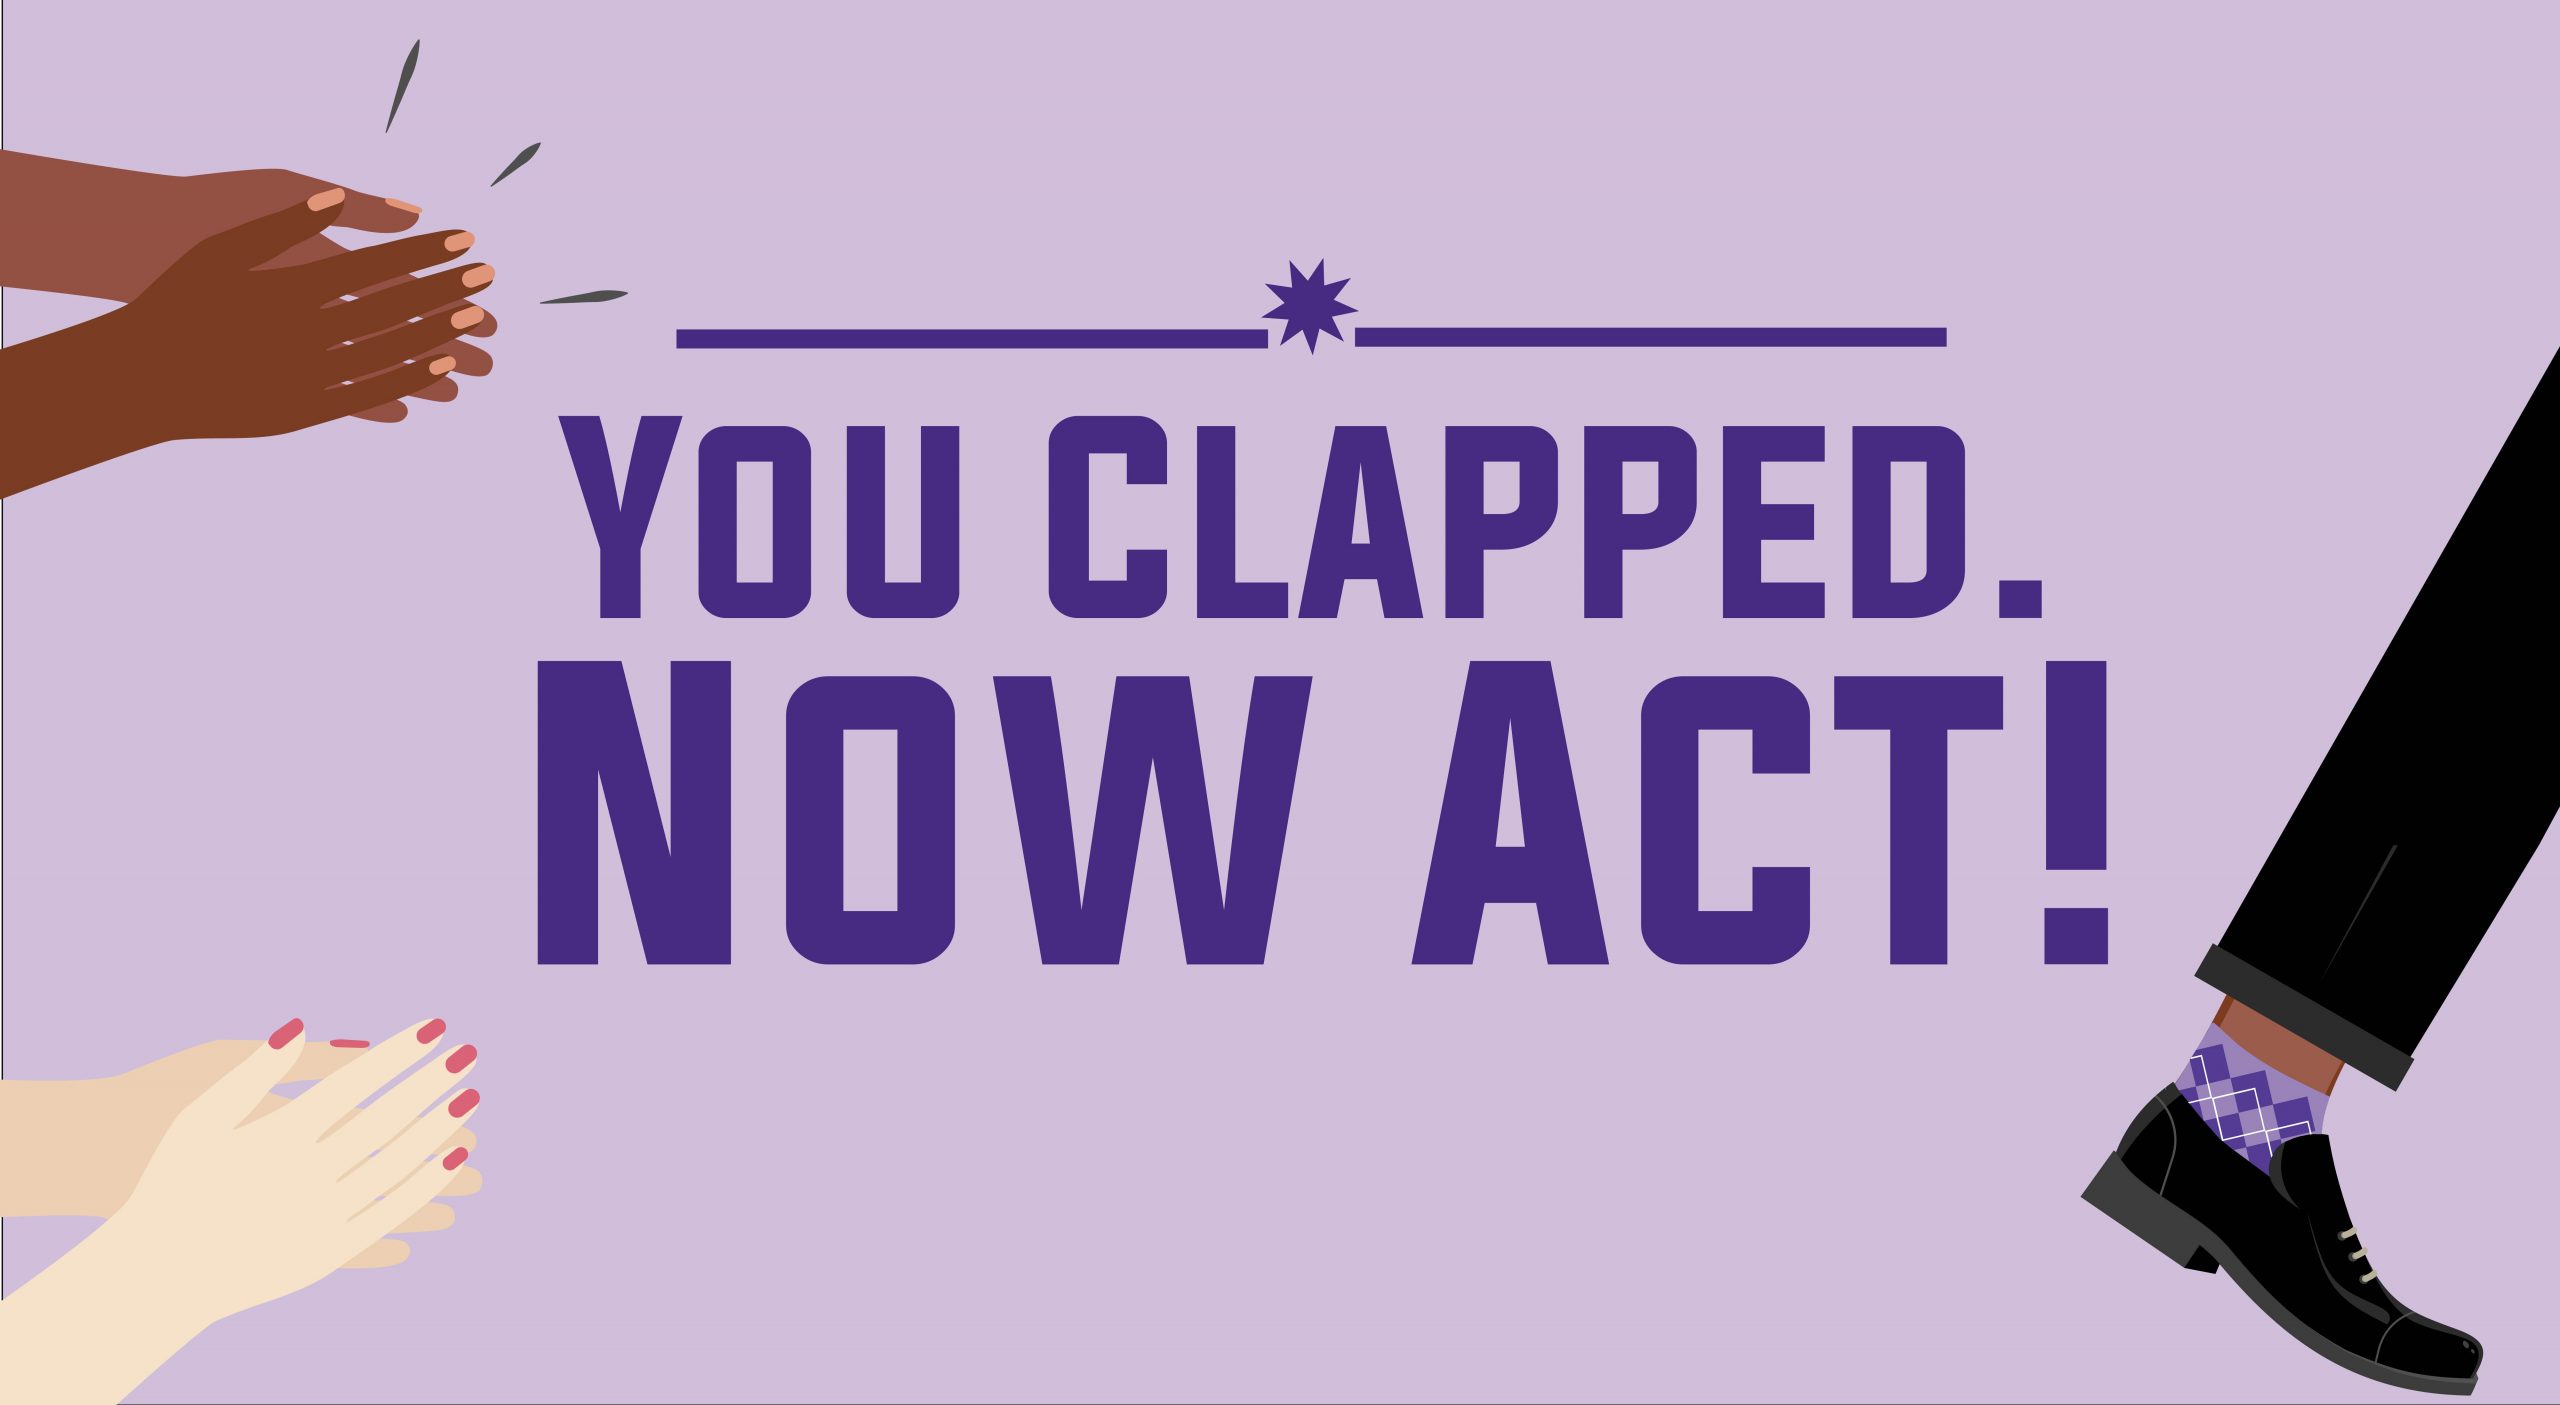 You Clapped. Now Act!